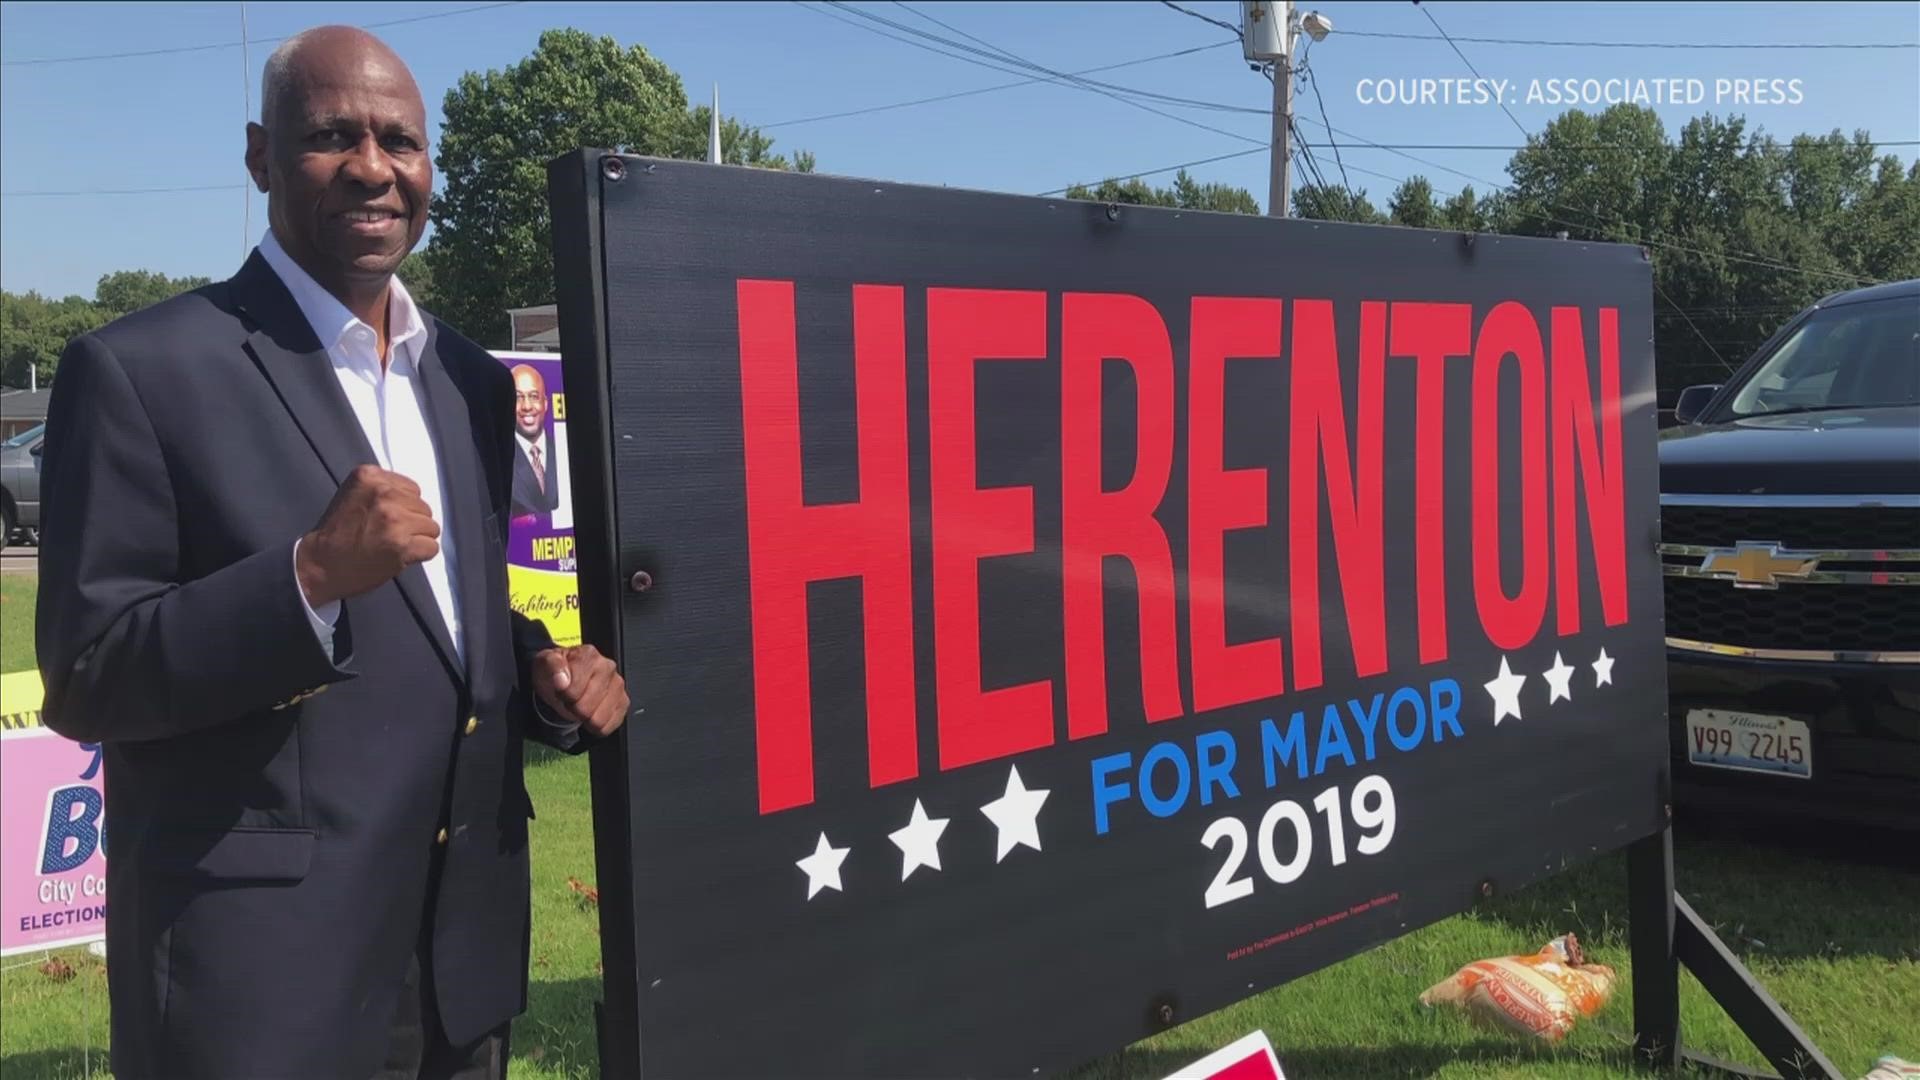 Herenton has announced his candidacy for Memphis mayor on Monday through his Facebook page.